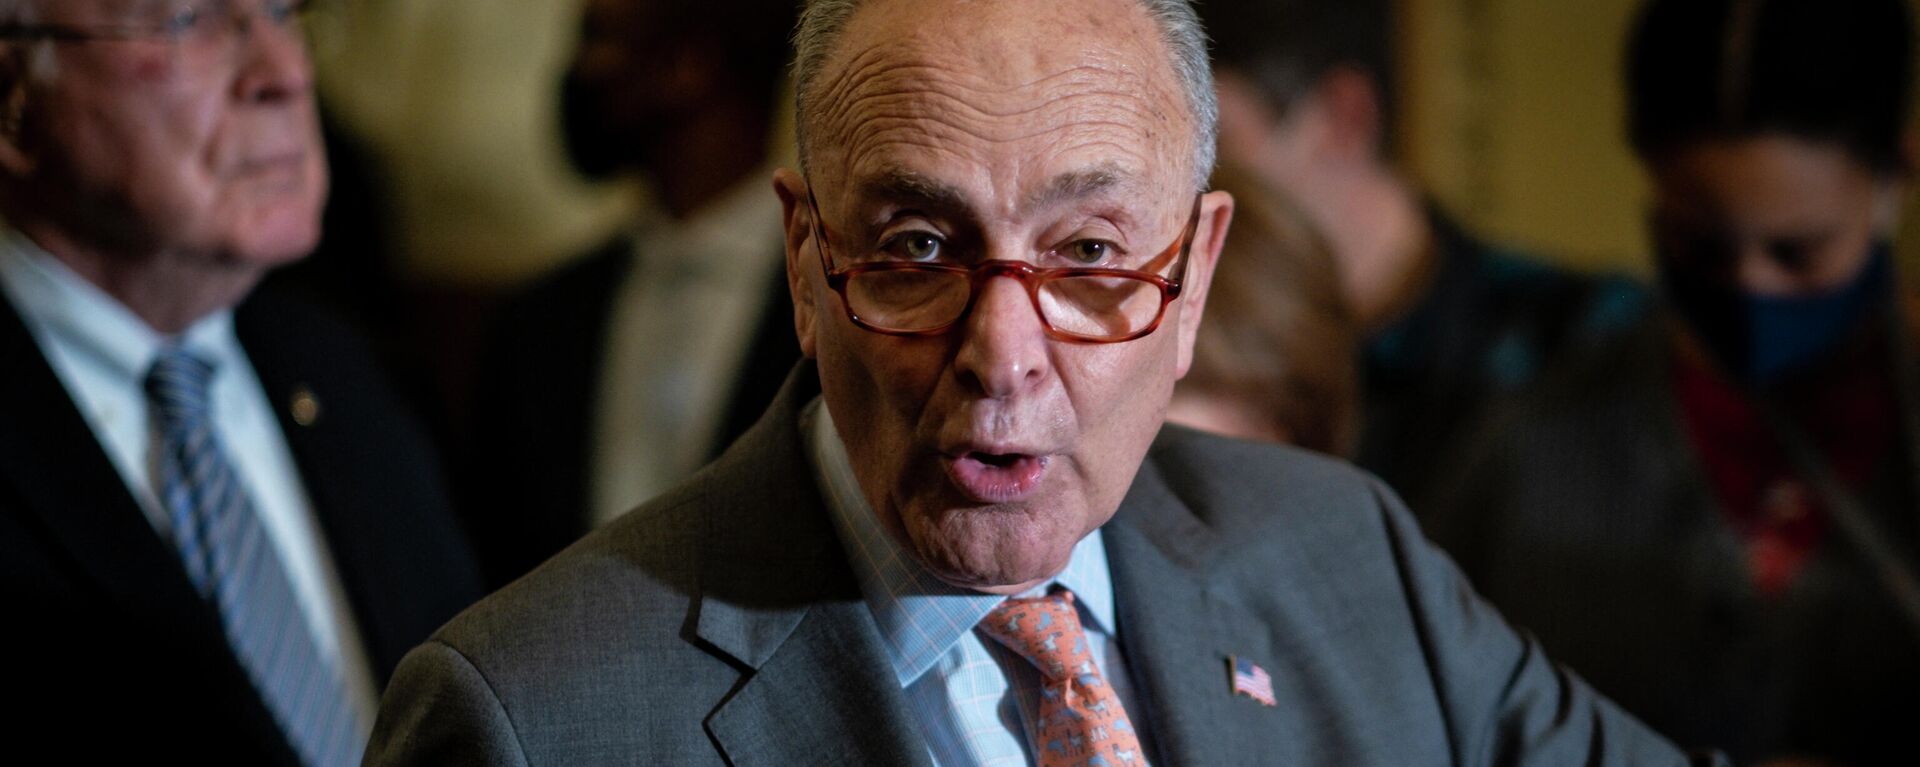 Senate Majority Leader Chuck Schumer (D-NY) speaks during a press availability following the democratic caucus luncheon at the United States Capitol on November 2, 2021 in Washington, DC.   - Sputnik International, 1920, 04.08.2022